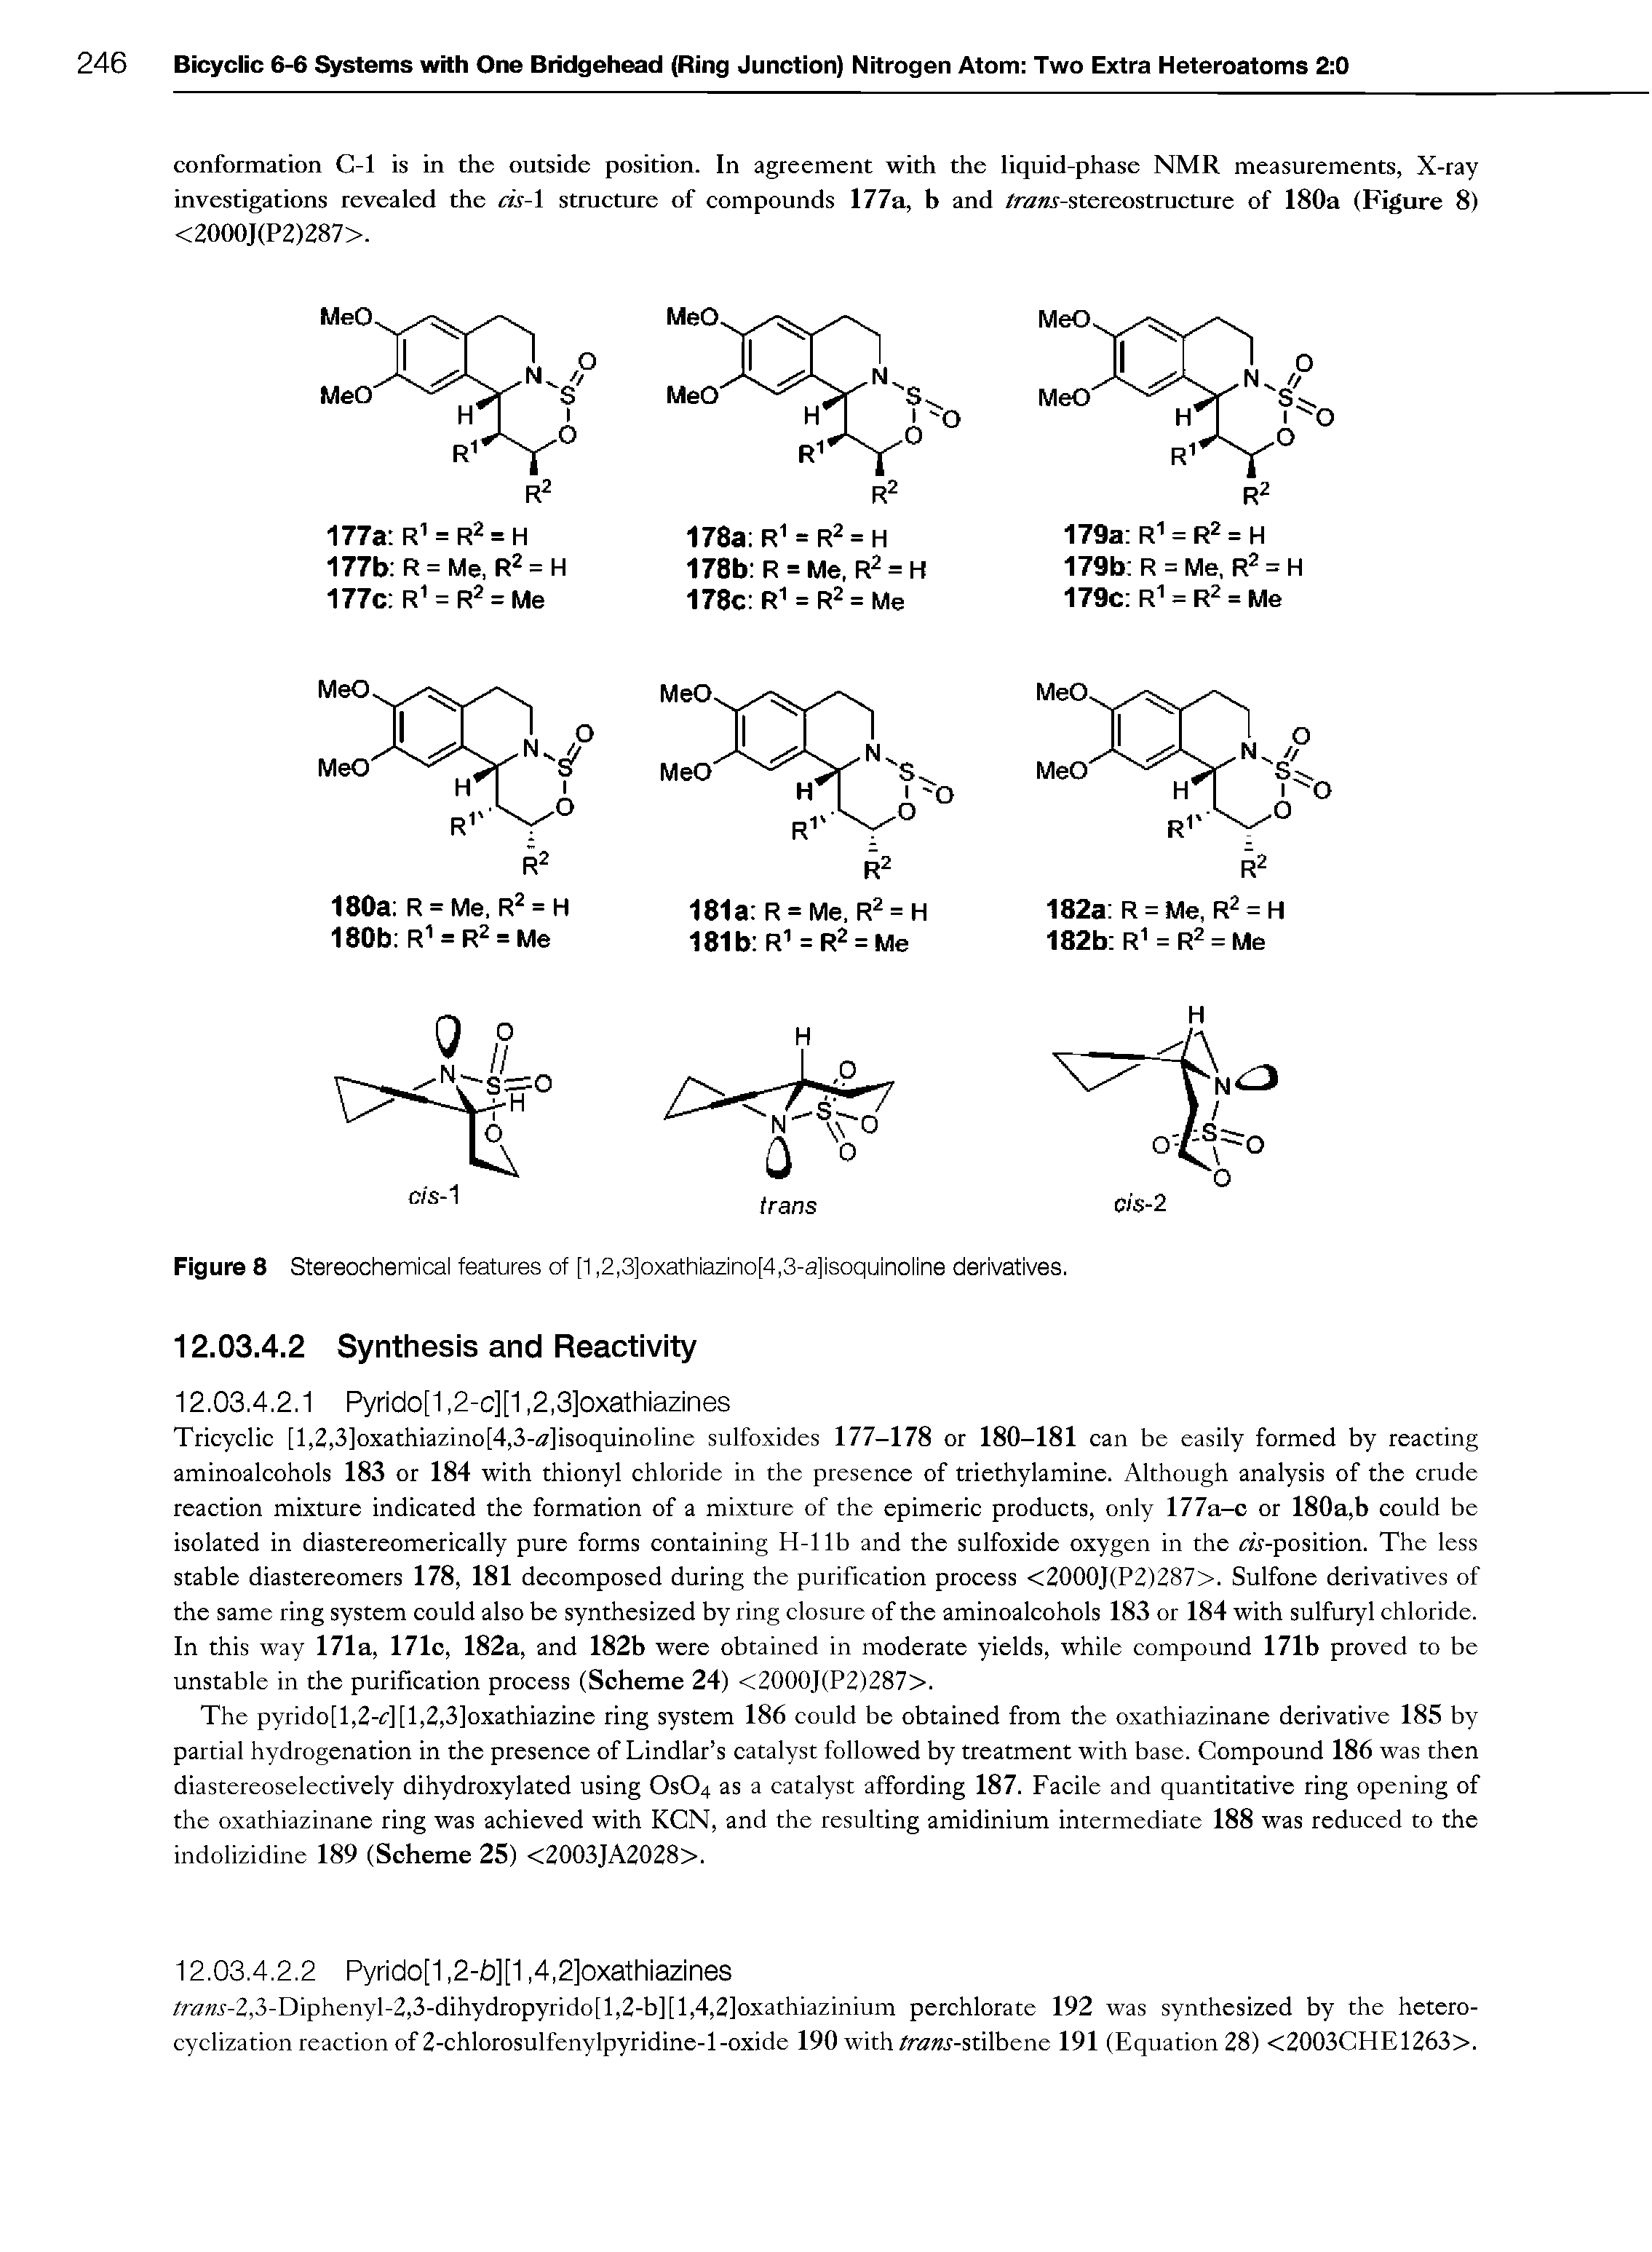 Figure 8 Stereochemical features of [1,2,3]oxathiazino[4,3-a]isoquinoline derivatives.